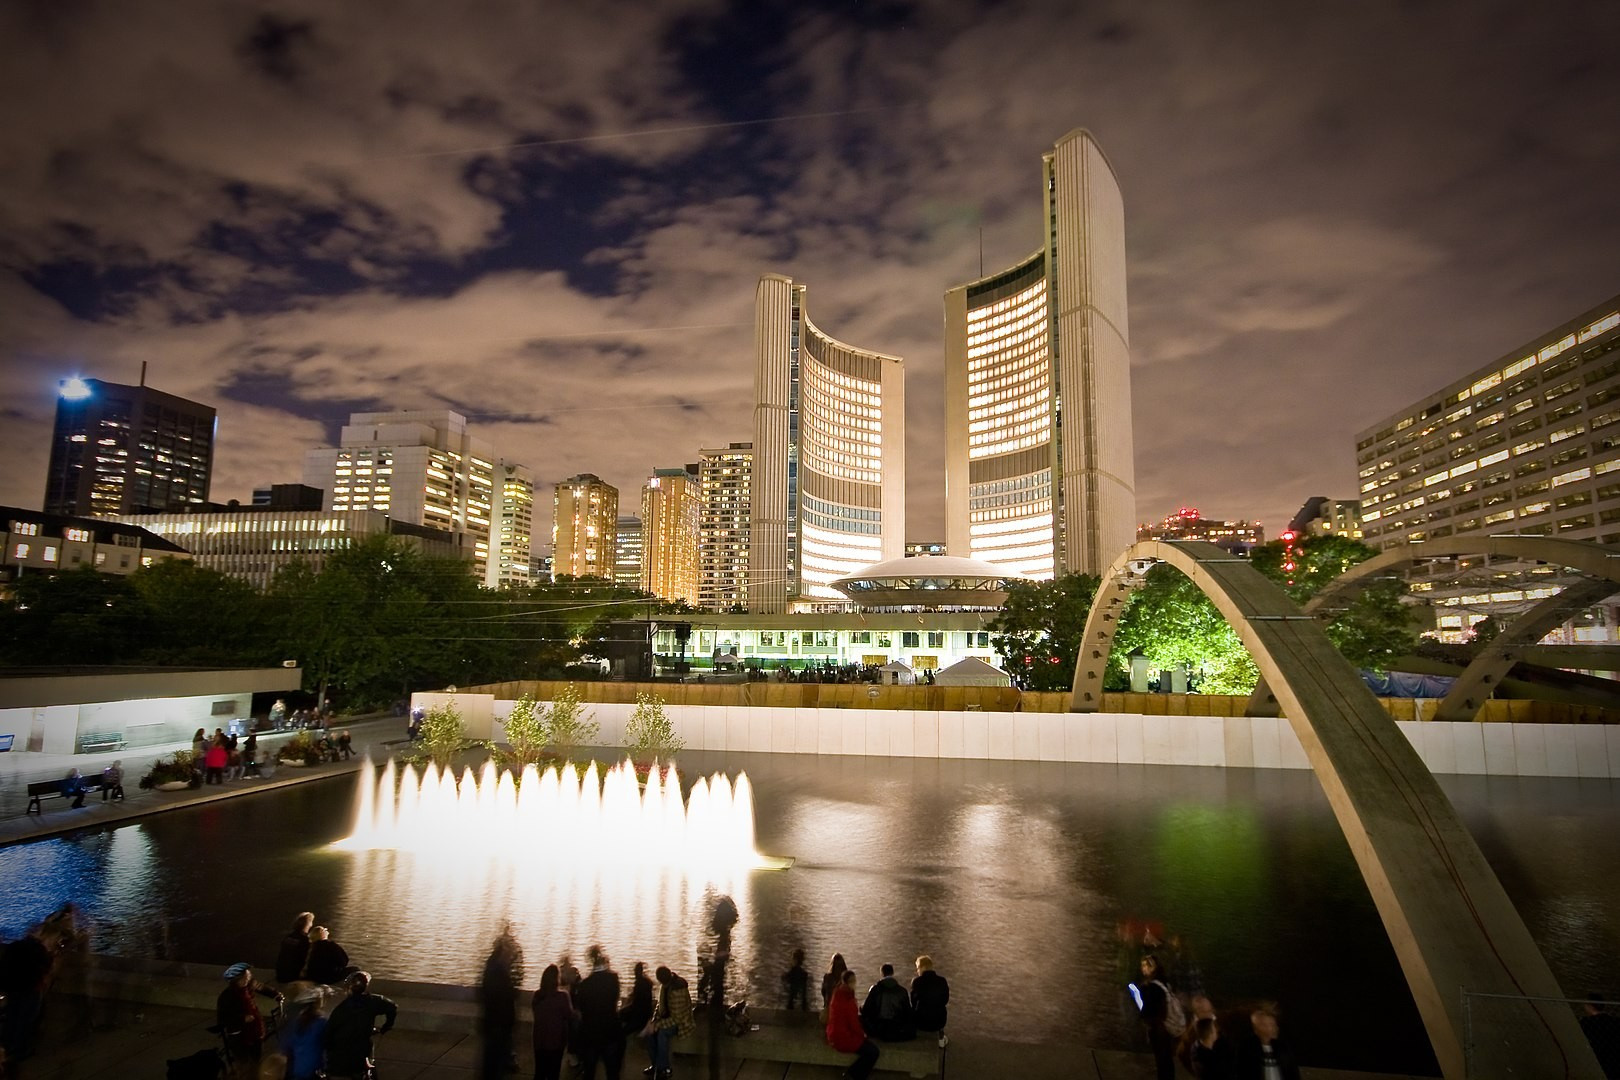 By Benson Kua from Toronto, Canada - City GlowUploaded by tm, CC BY-SA 2.0, https://commons.wikimedia.org/w/index.php?curid=25887796